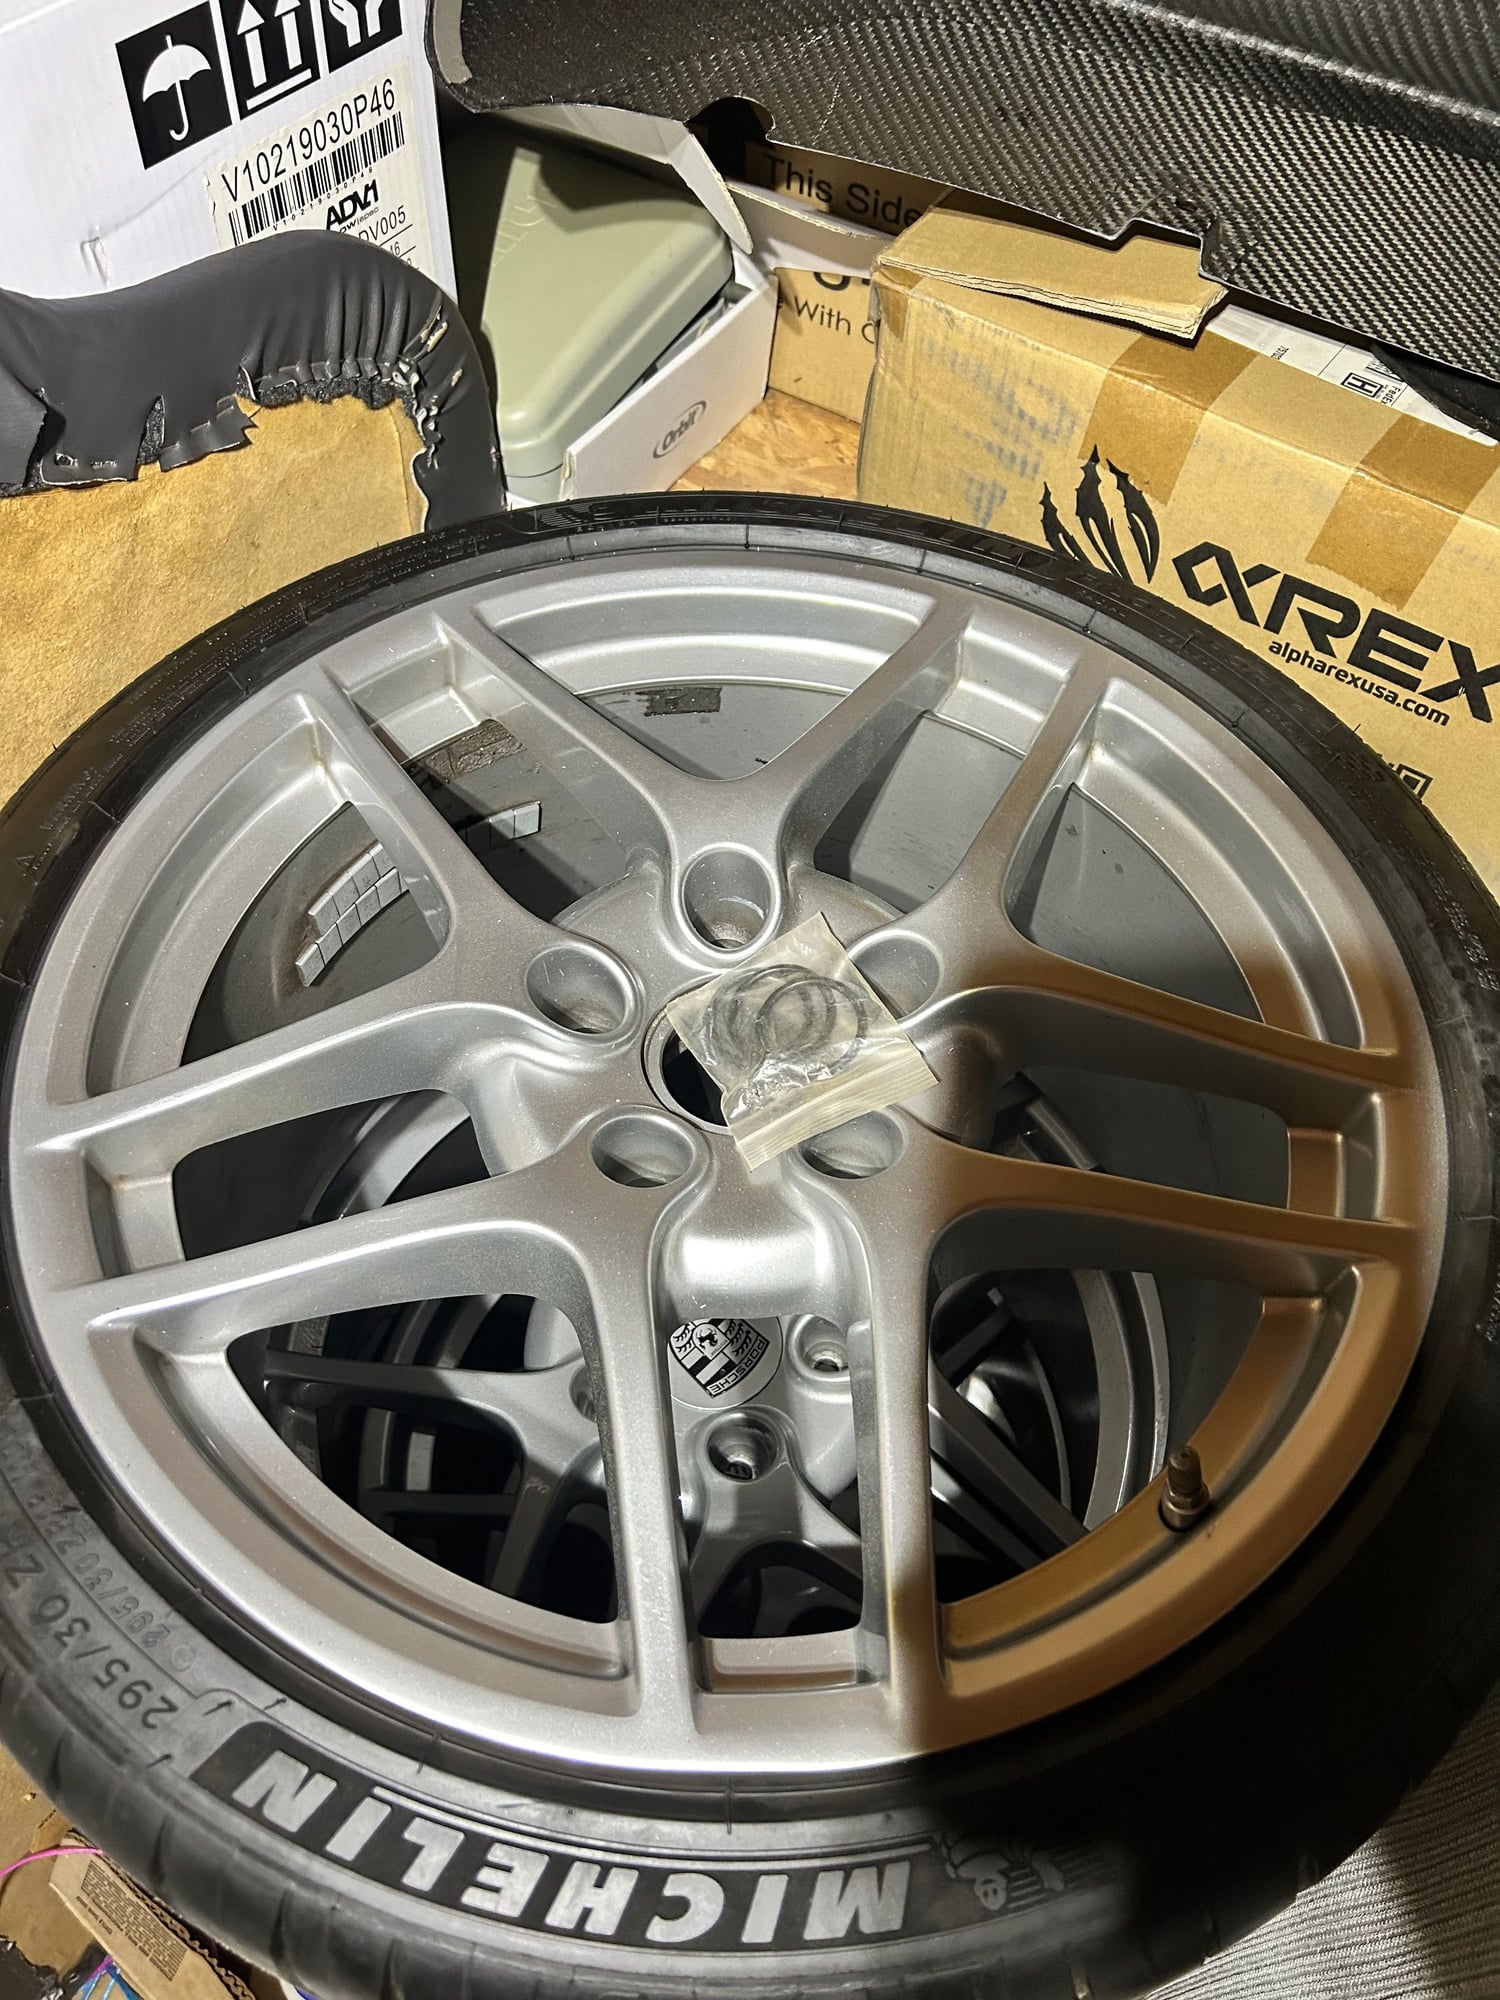 Wheels and Tires/Axles - 997 Carerra wheels/tires - Used - 2006 to 2010 Porsche 911 - Dallas Area, TX 75088, United States